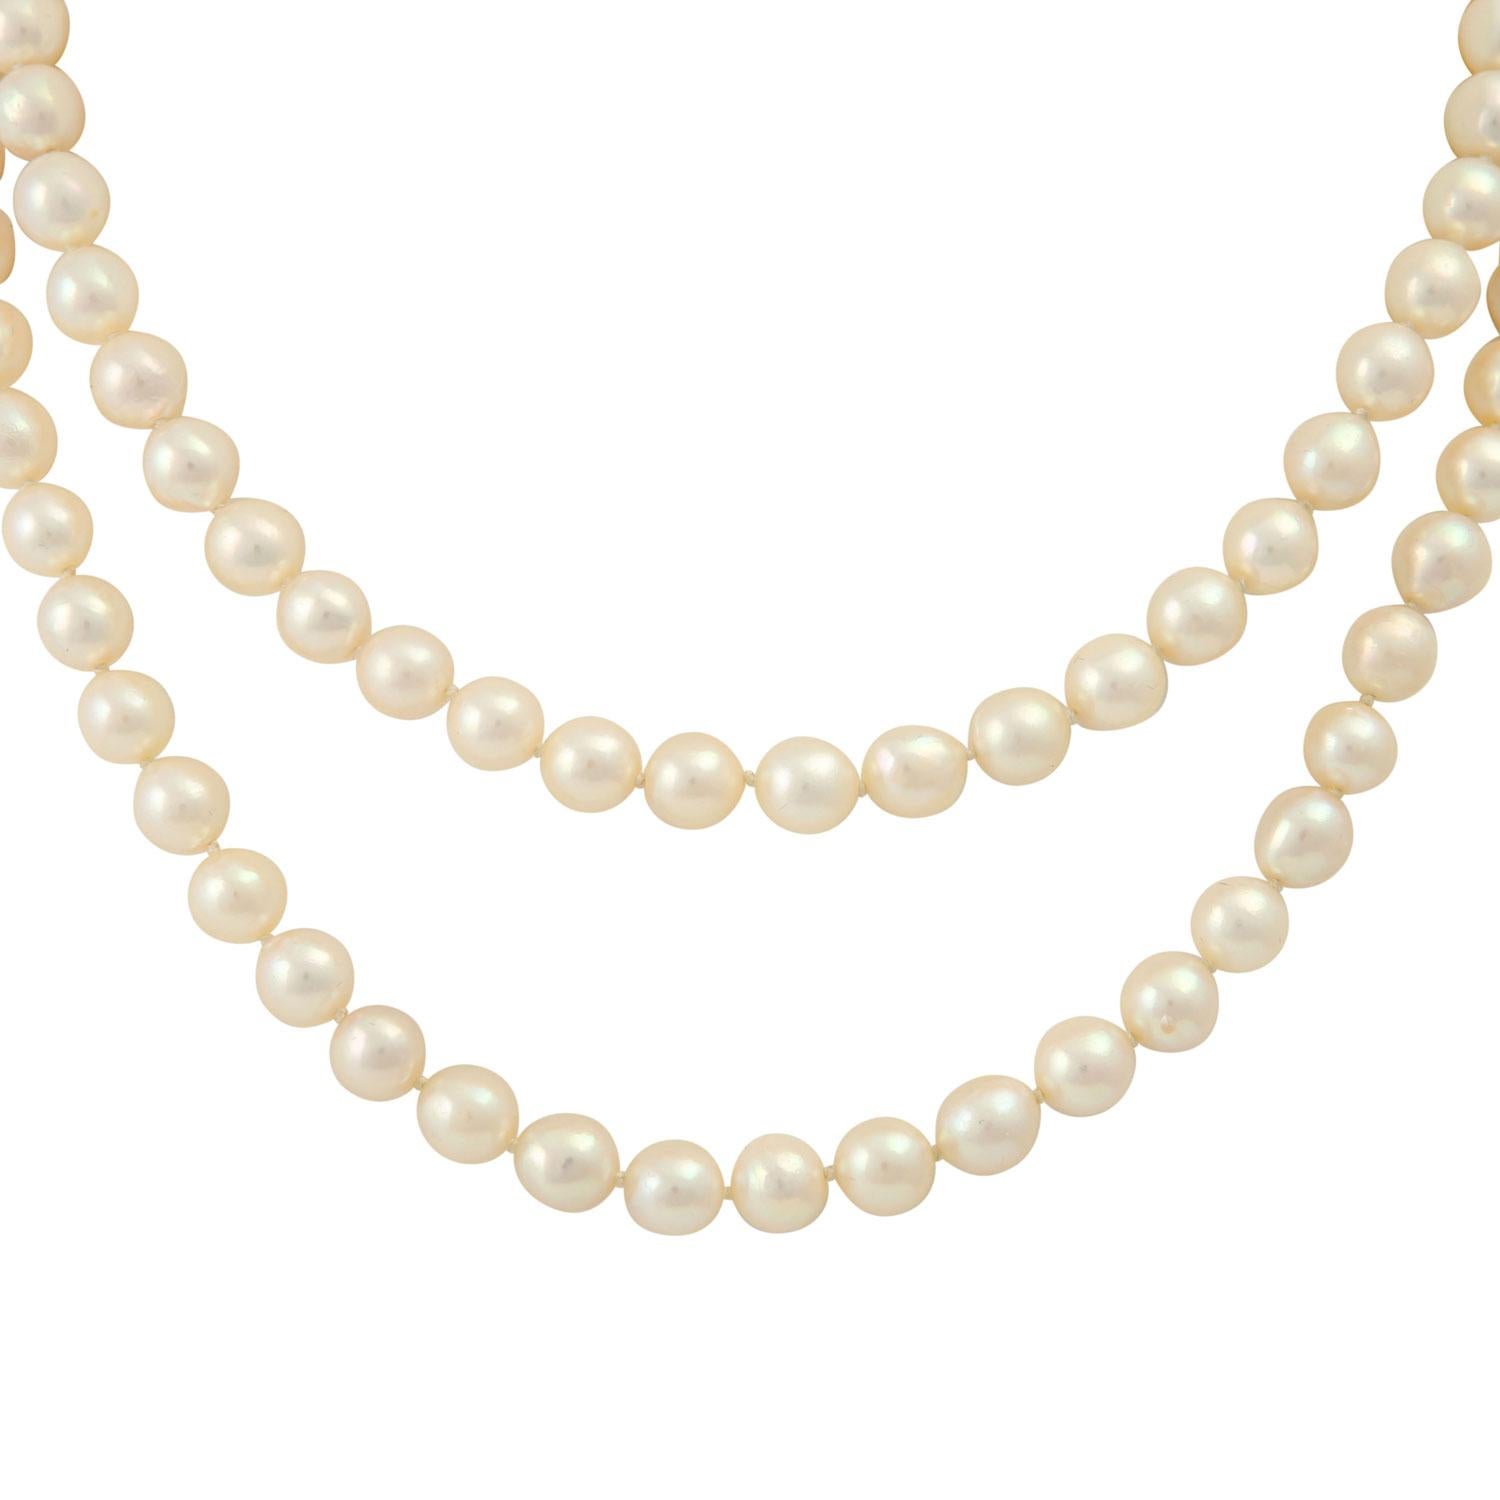 Necklace made of cultured pearls approx. 7-8 mm, clasp with cultured p. approx. 7 mm, 16 brilliant. totaling approx. 0.54 ct, approx. LGW/SI, WG 14K, L: approx. 84 cm.

